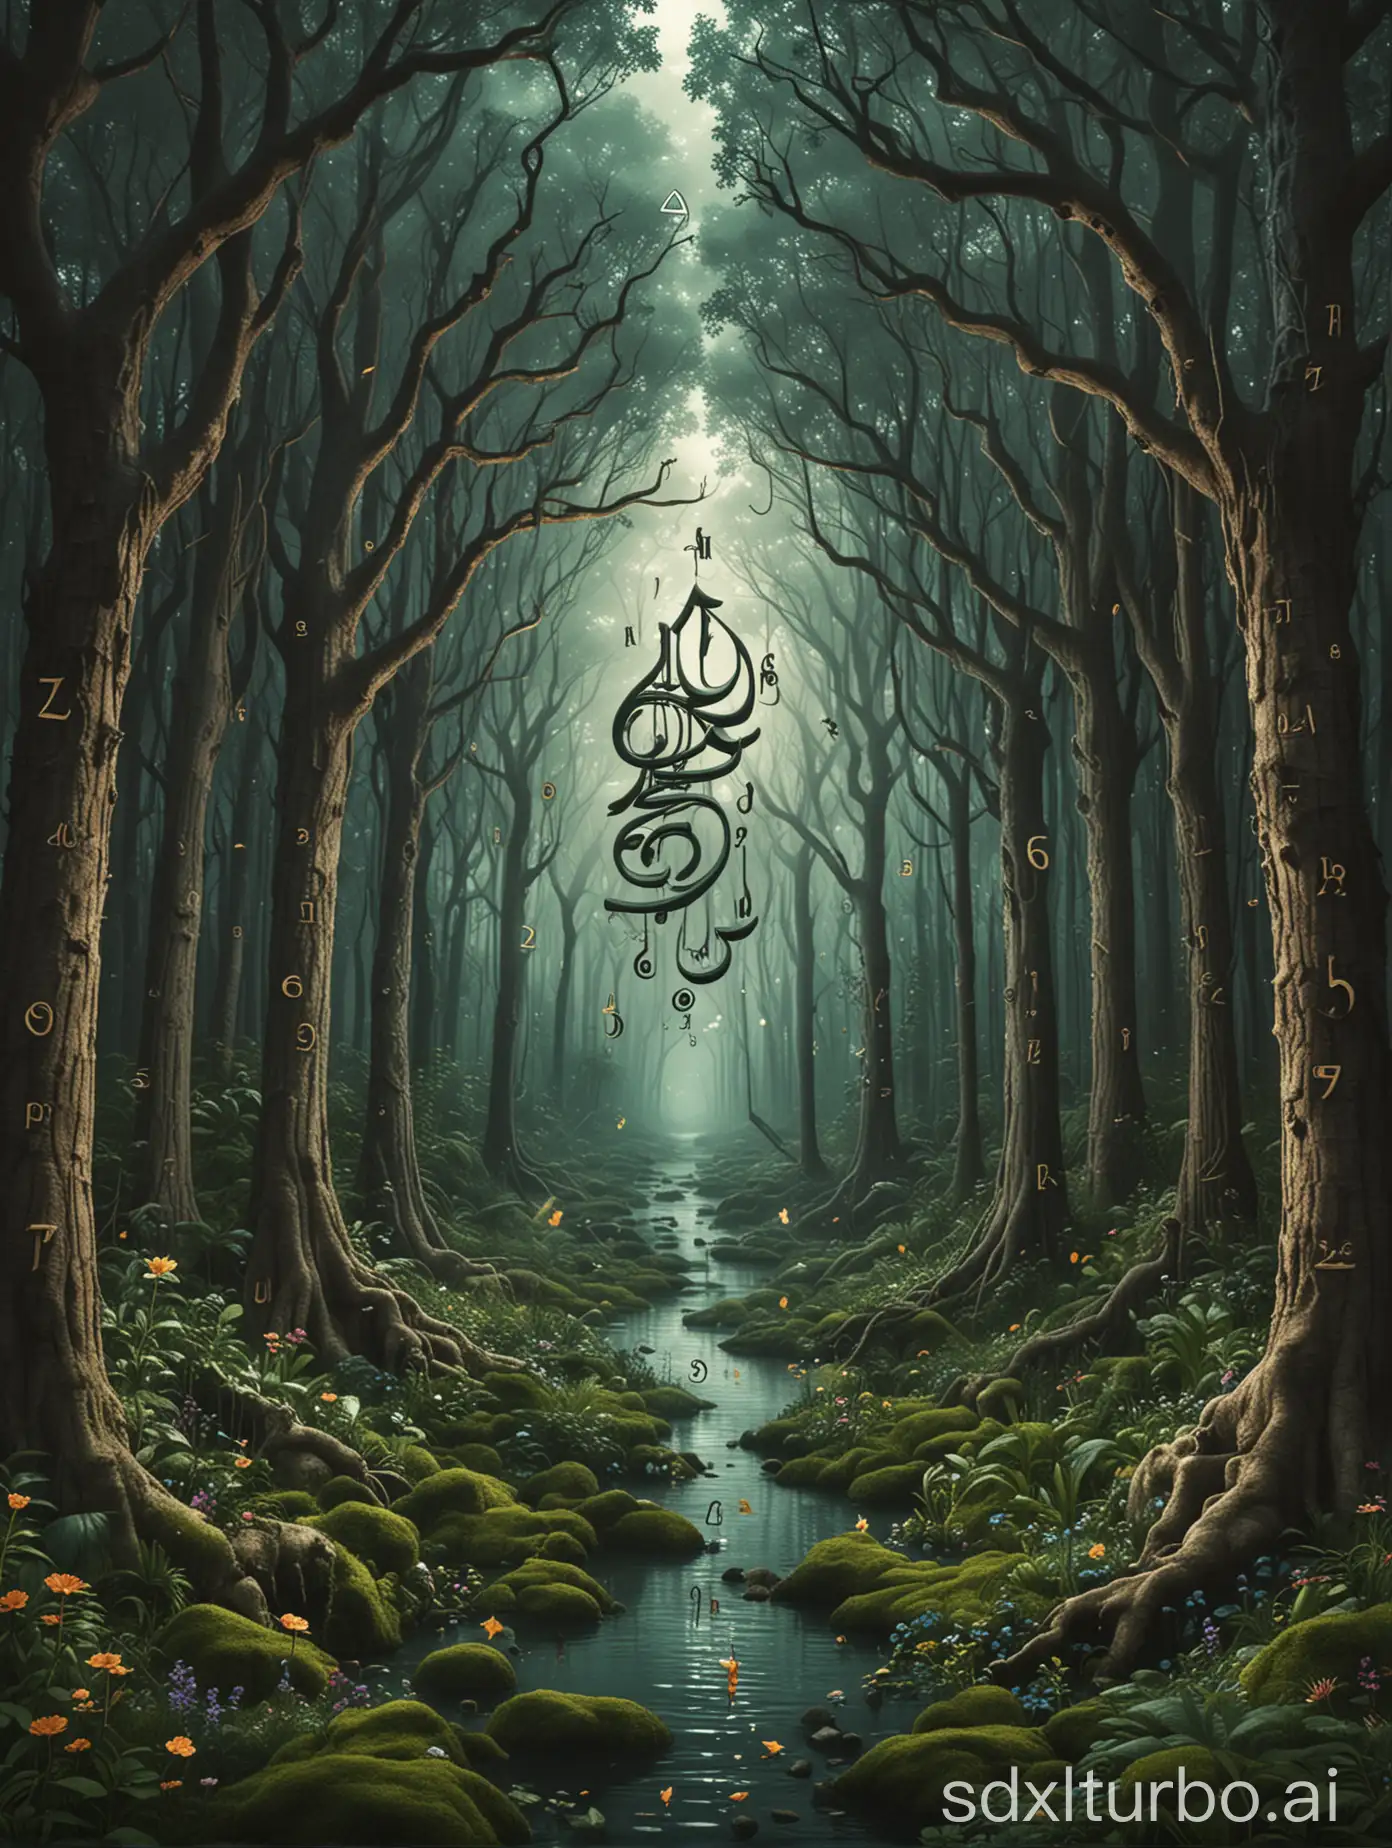 Album cover design for music production, themed around enchanted forest and Arabic numerals.